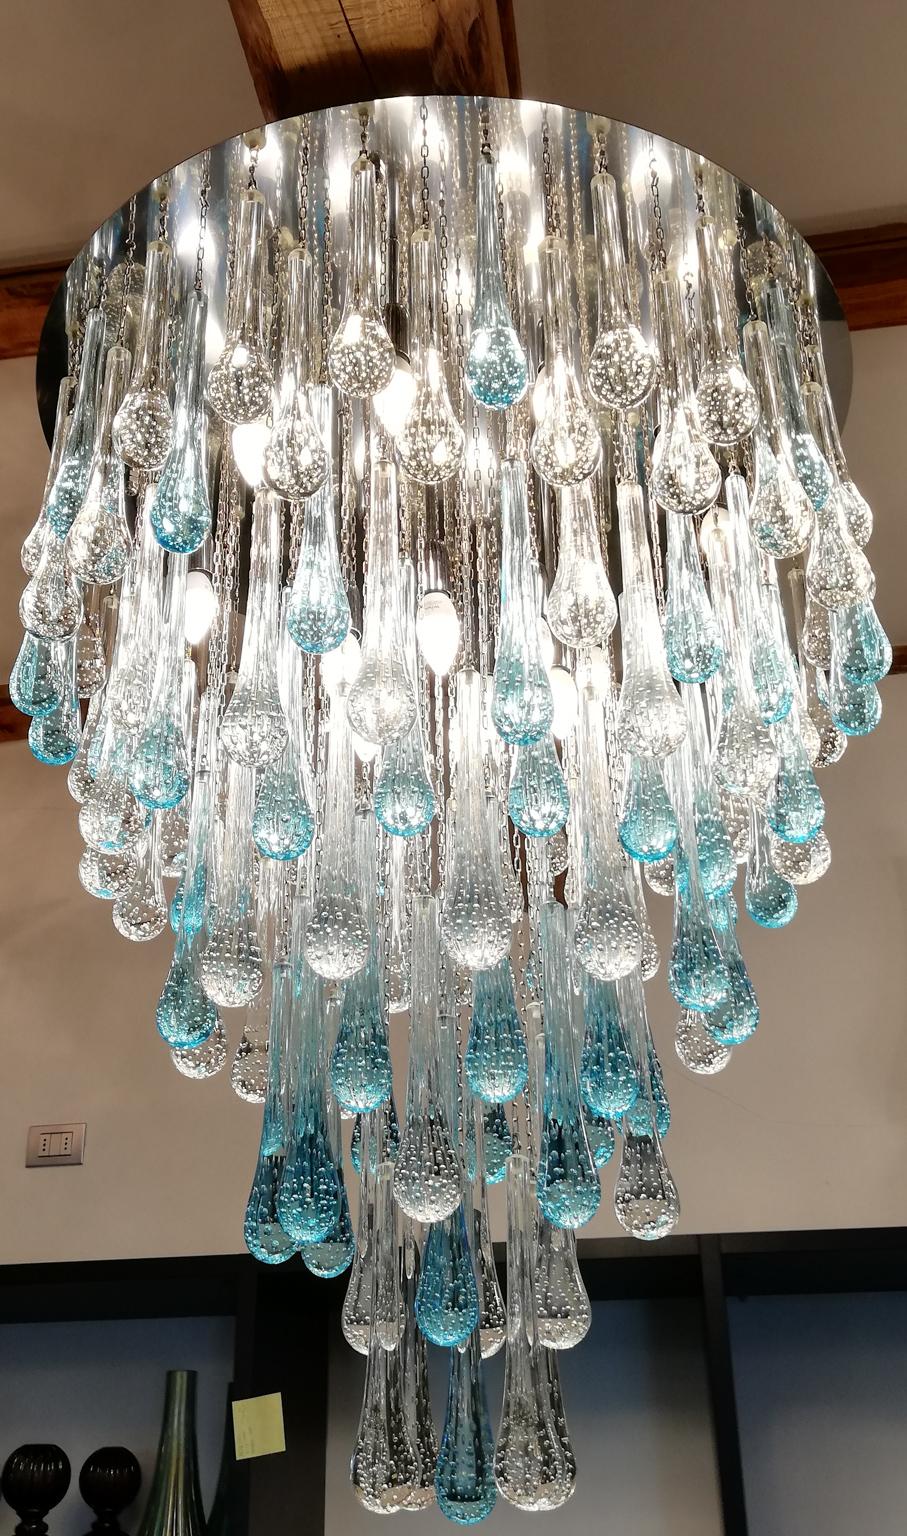 Franco Luce Mid-Century Modern Crystal Murano Glass Chandelier Gocce, 1980 For Sale 9